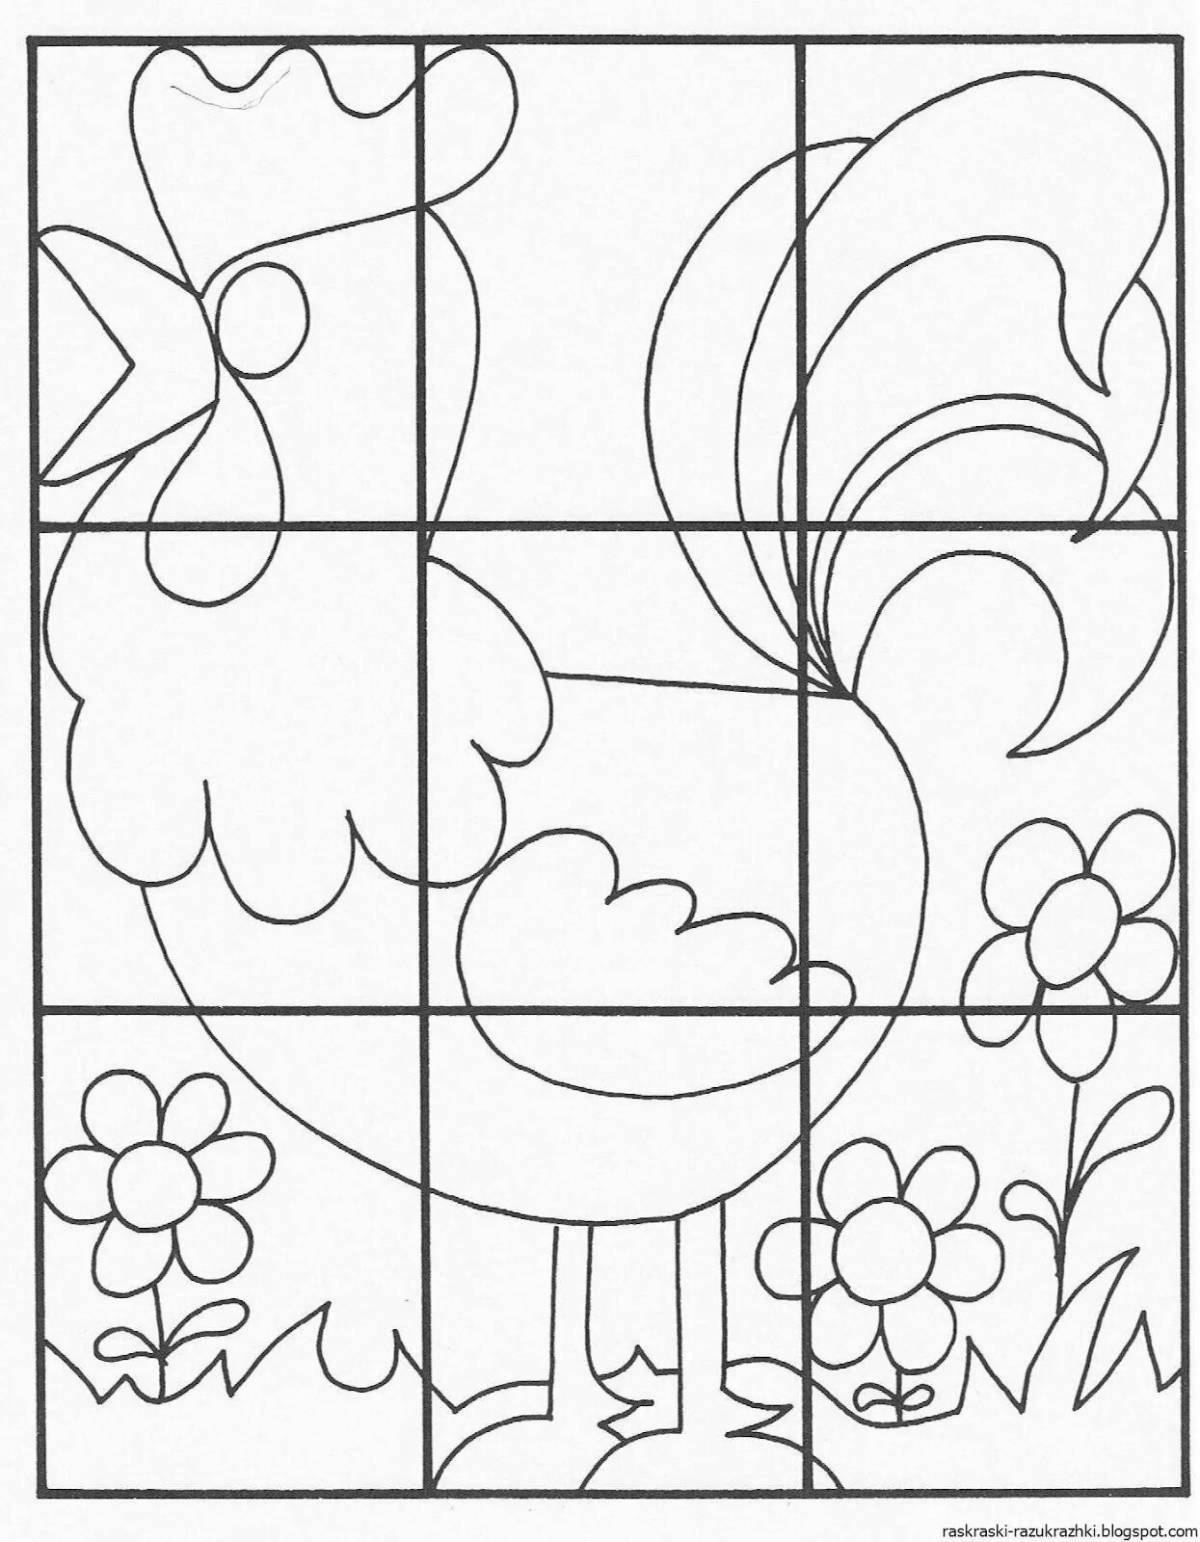 Jolly children's coloring puzzle